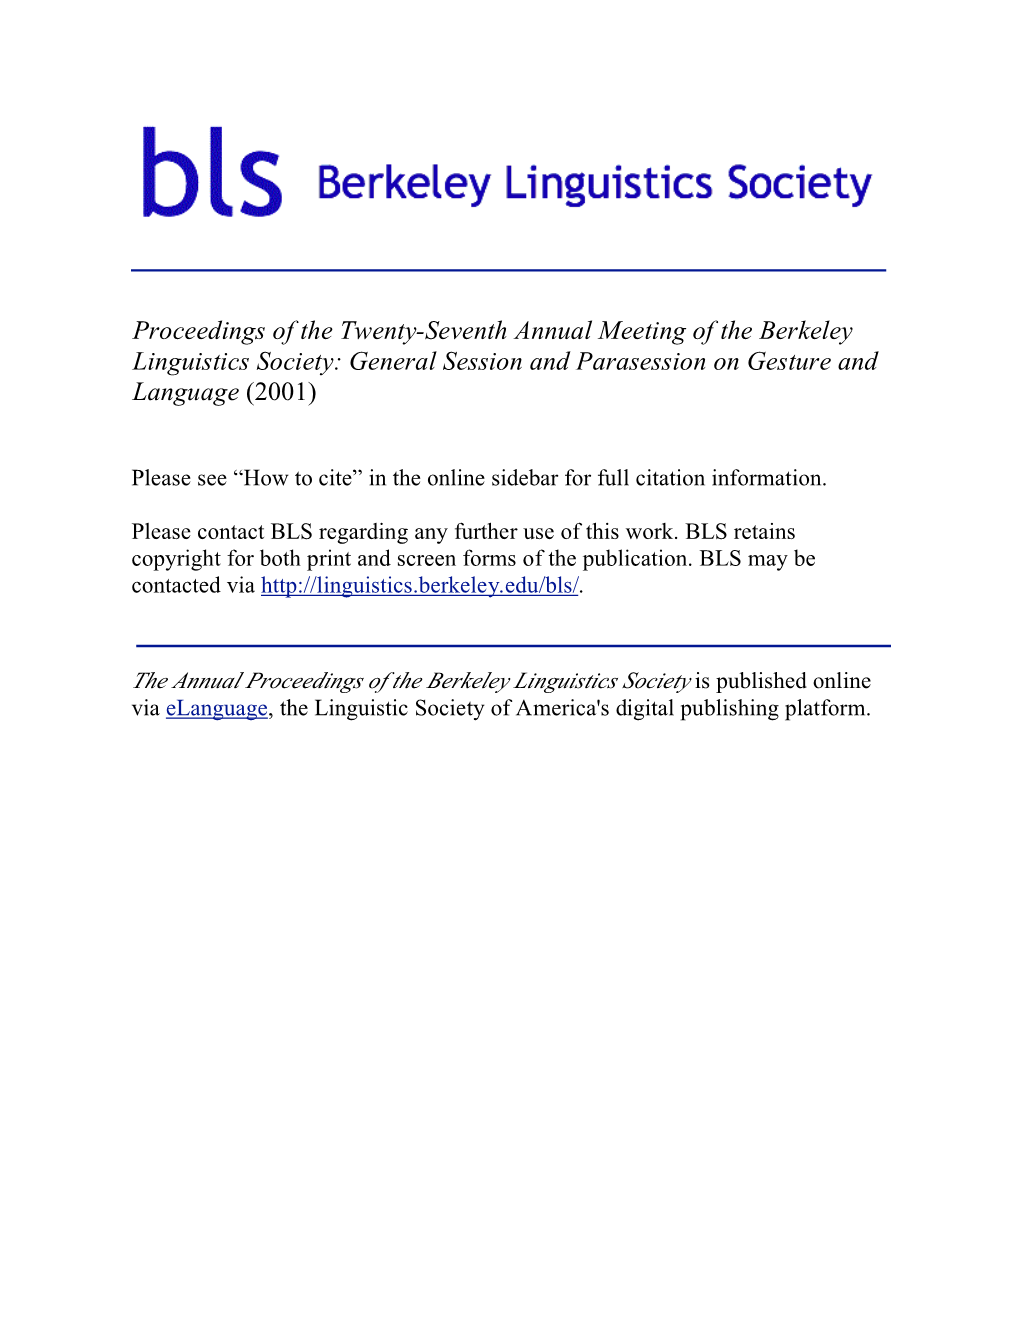 Proceedings of the Twenty-Seventh Annual Meeting of the Berkeley Linguistics Society: General Session and Parasession on Gesture and Language (2001)